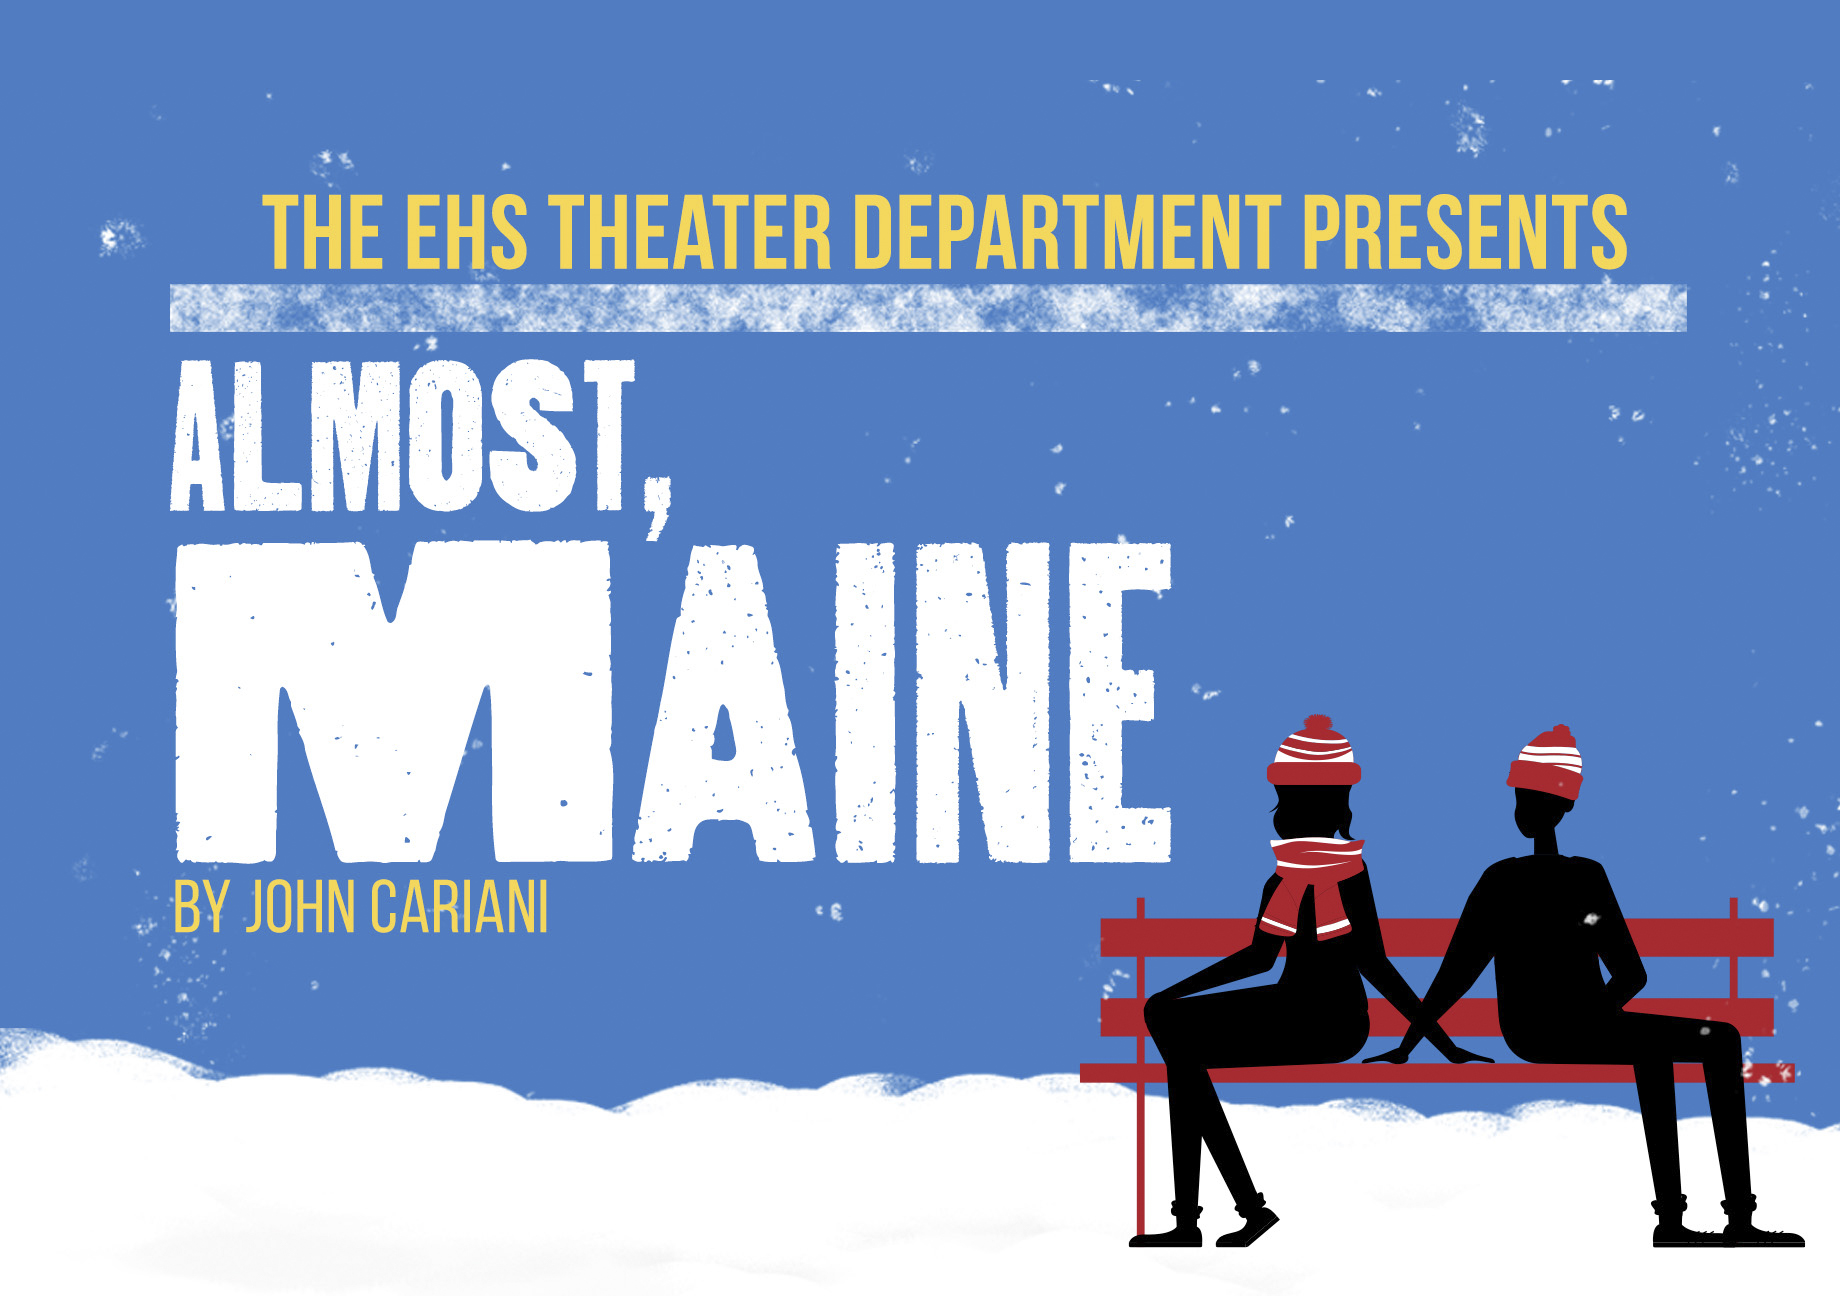 EHS Presents Almost, Maine Tickets Available October 17th